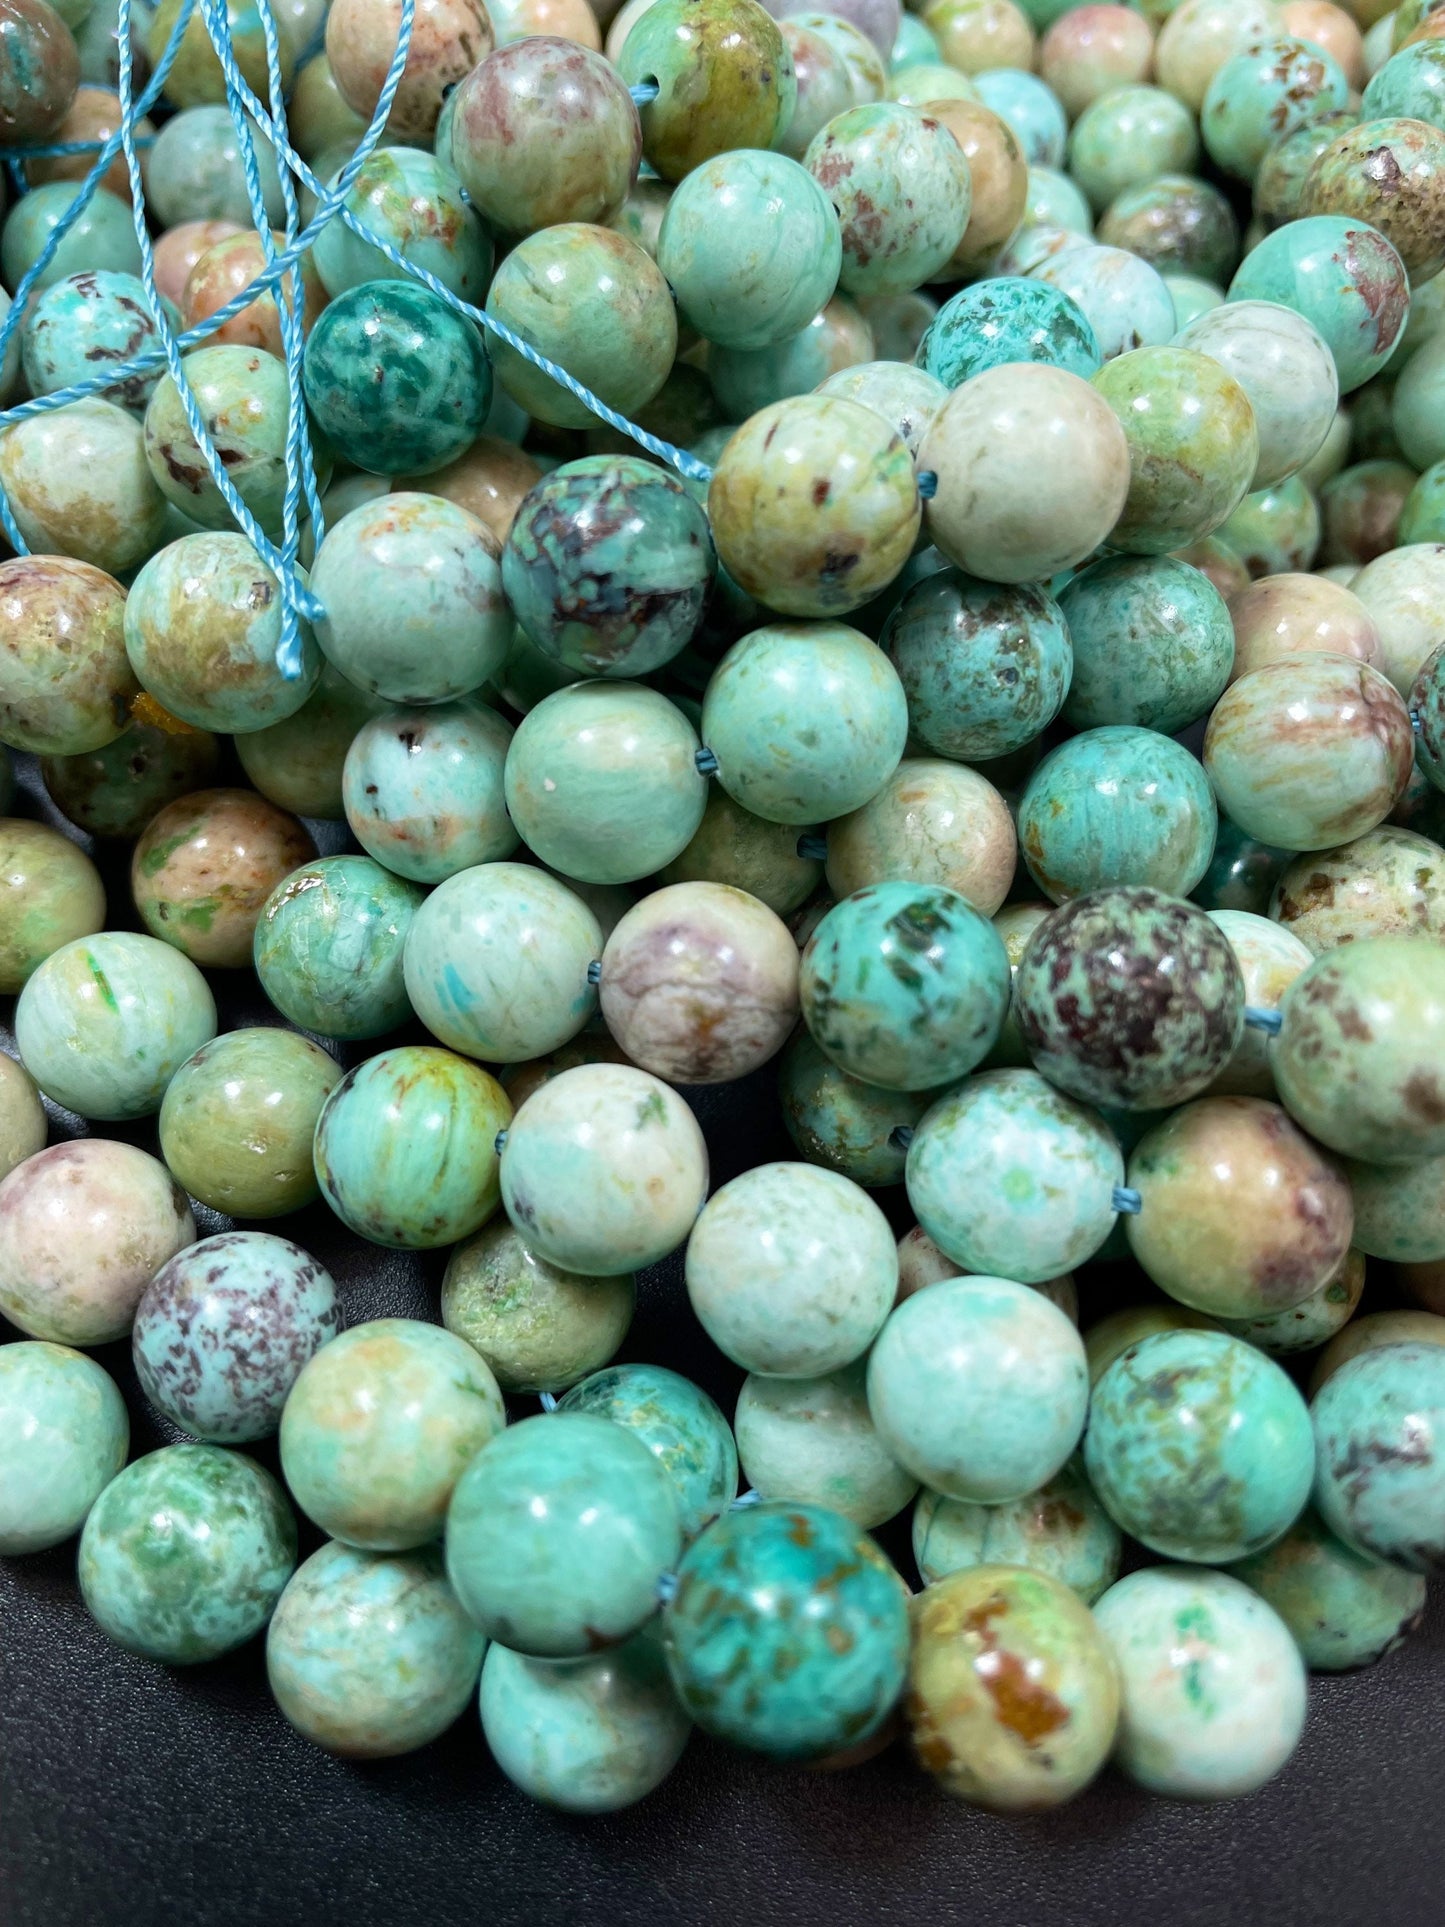 AAA Natural Peru Turquoise Gemstone Bead 8mm 10mm Round Bead, Gorgeous Natural Blue Green Color Turquoise Bead